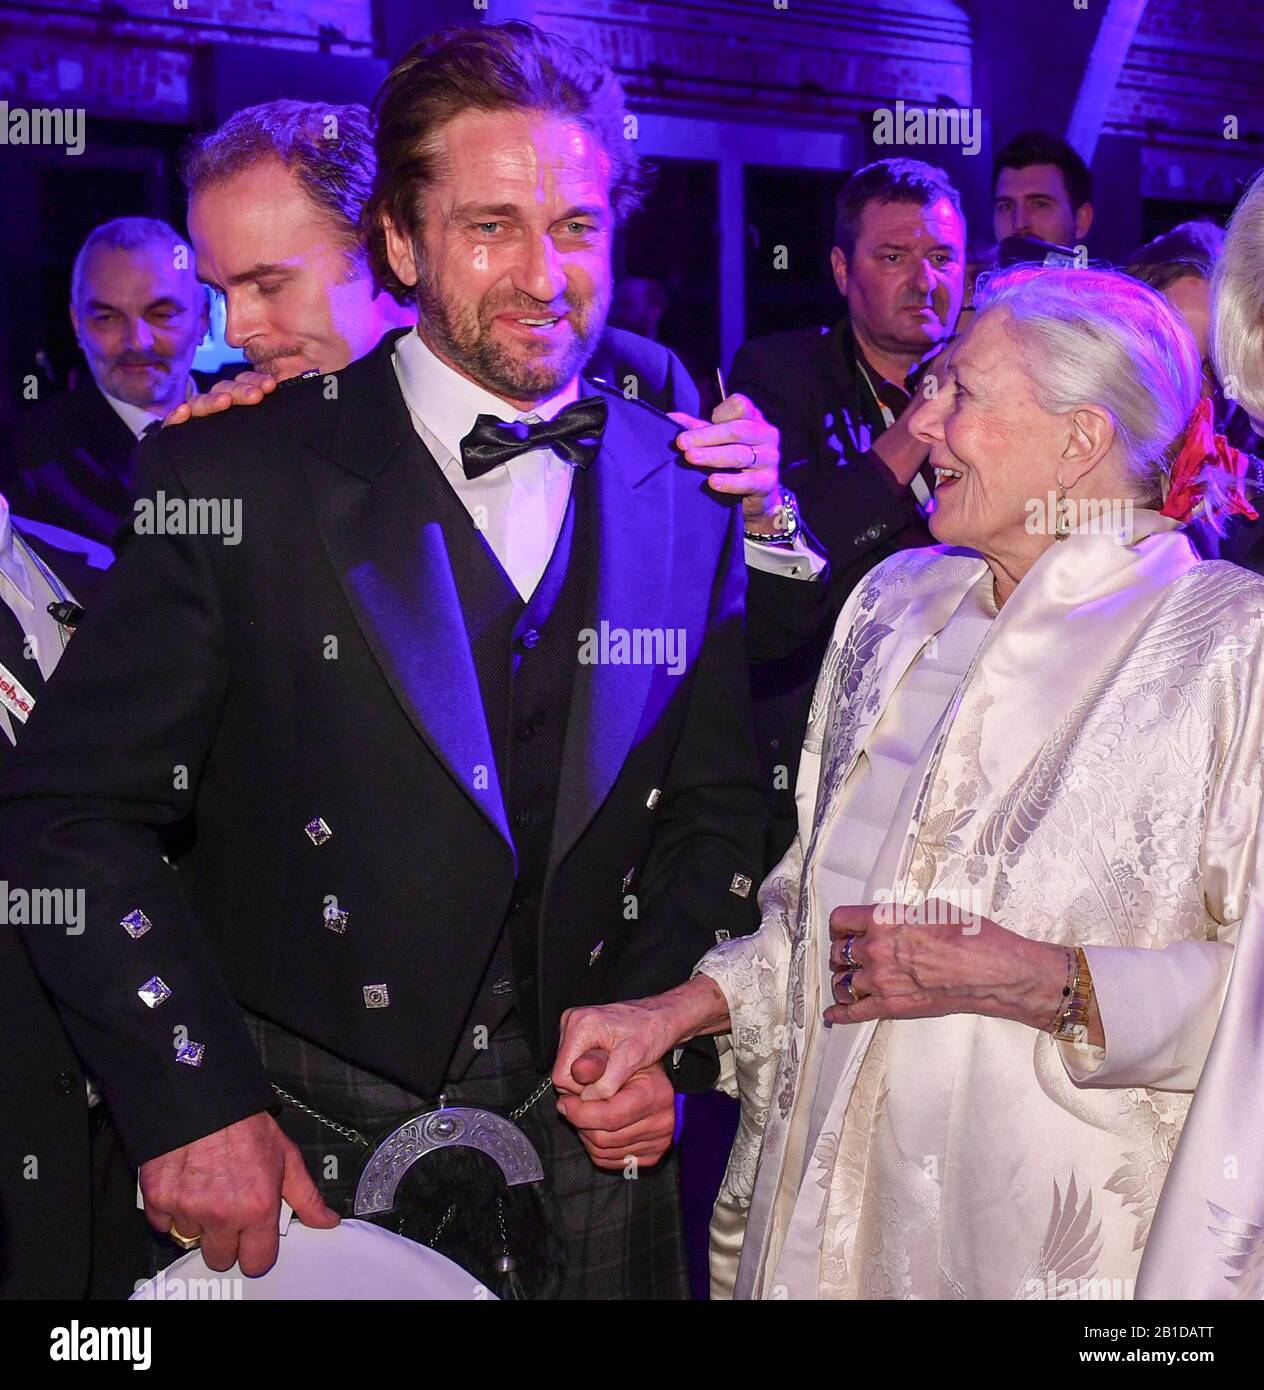 Berlin, Germany. 23rd Feb, 2020. 70th Berlinale, Cinema for Peace Gala: Carlo Gabriel Nero (l-r), the son of Vanessa Redgrave and Franco Nero, actor Gerard Butler and director Vanessa Redgrave The International Film Festival takes place from 20.02. to 01.03.2020. Credit: Jens Kalaene/dpa-Zentralbild/dpa/Alamy Live News Stock Photo